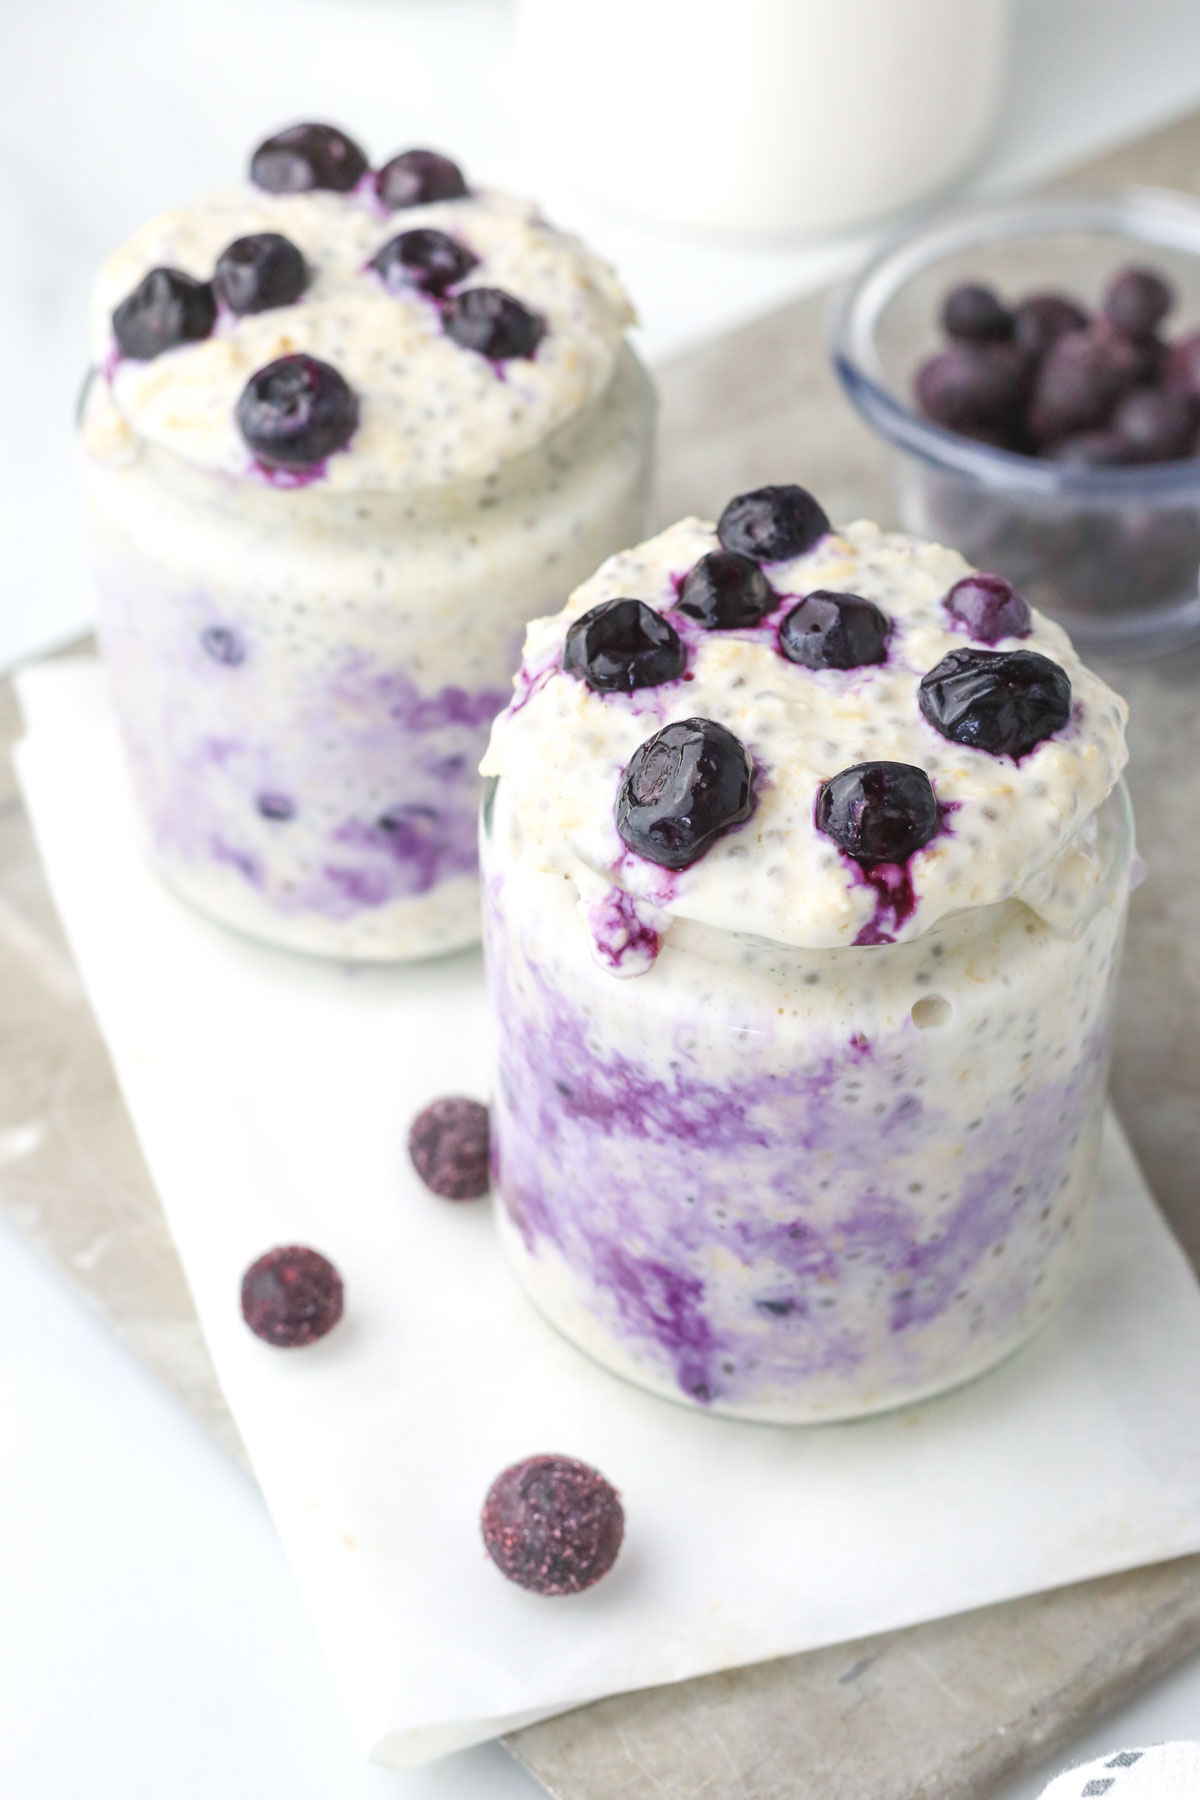 Two jars of cheesecake oats with blueberries on top.